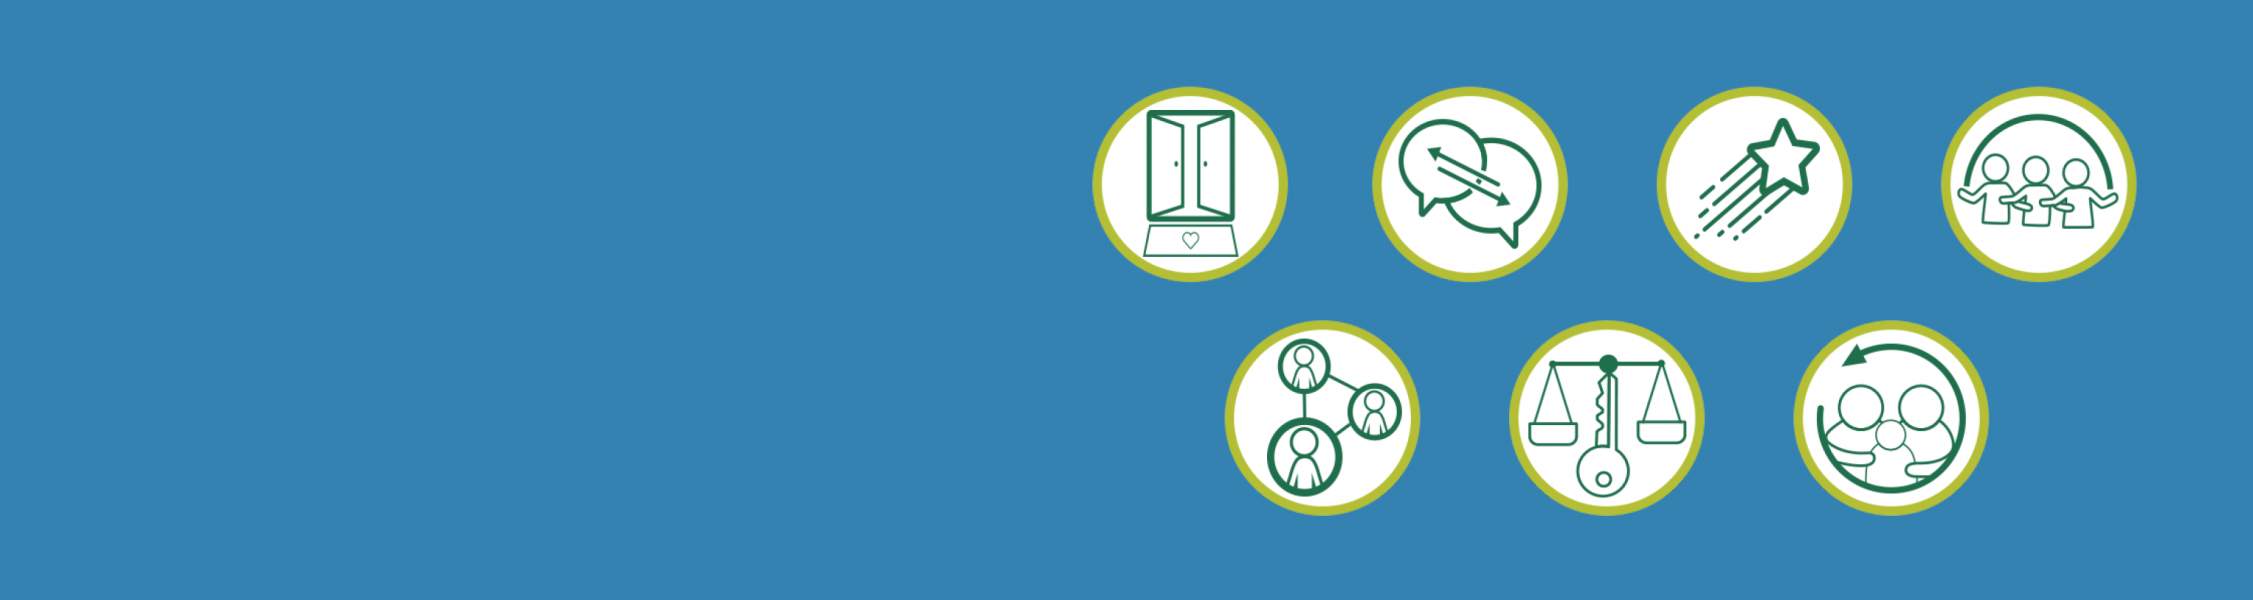 Seven icons that symbolize creating a welcoming environment, building effective two-way communication, supporting the success of students, sharing power and responsibility, partnering with the community, providing equity and access, and ensuring sustainability